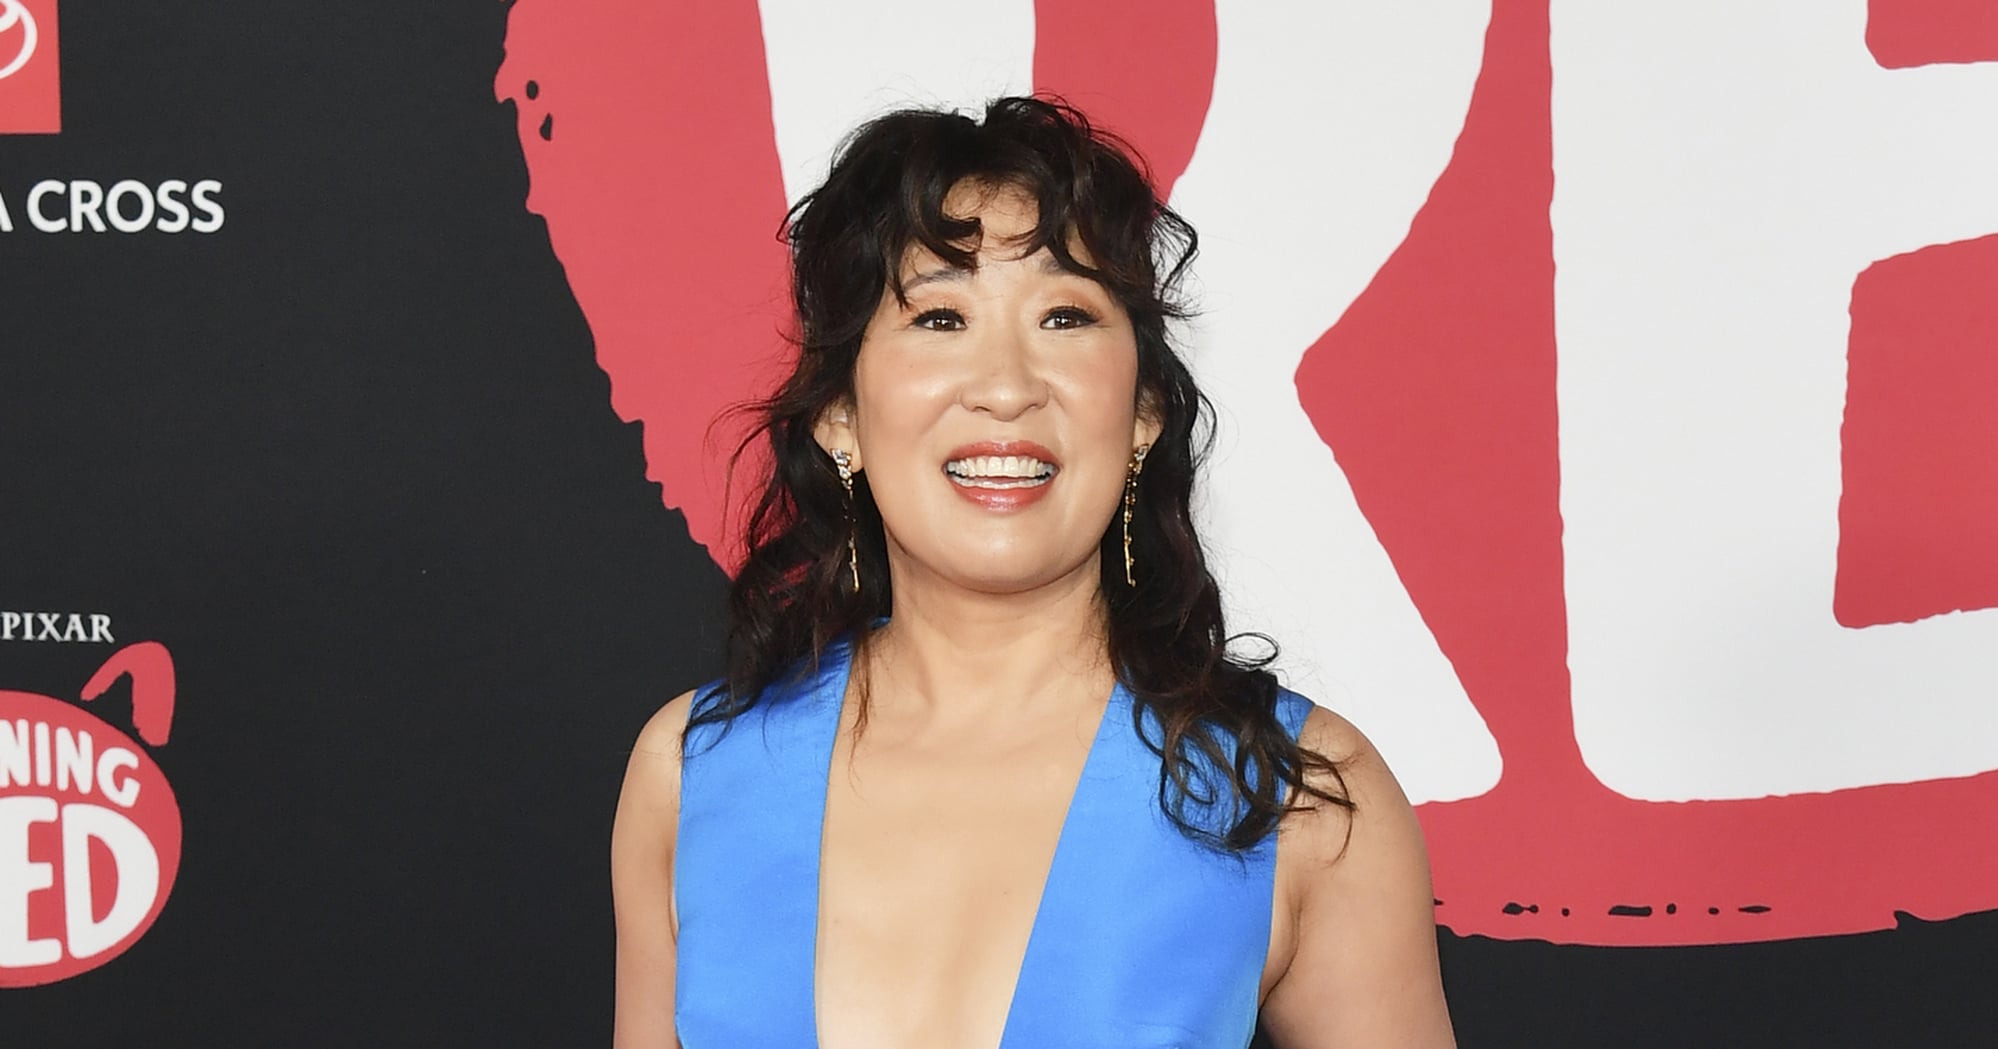 Sandra Oh Wants to Come Back For “The Princess Diaries 3:” “Call Me!”